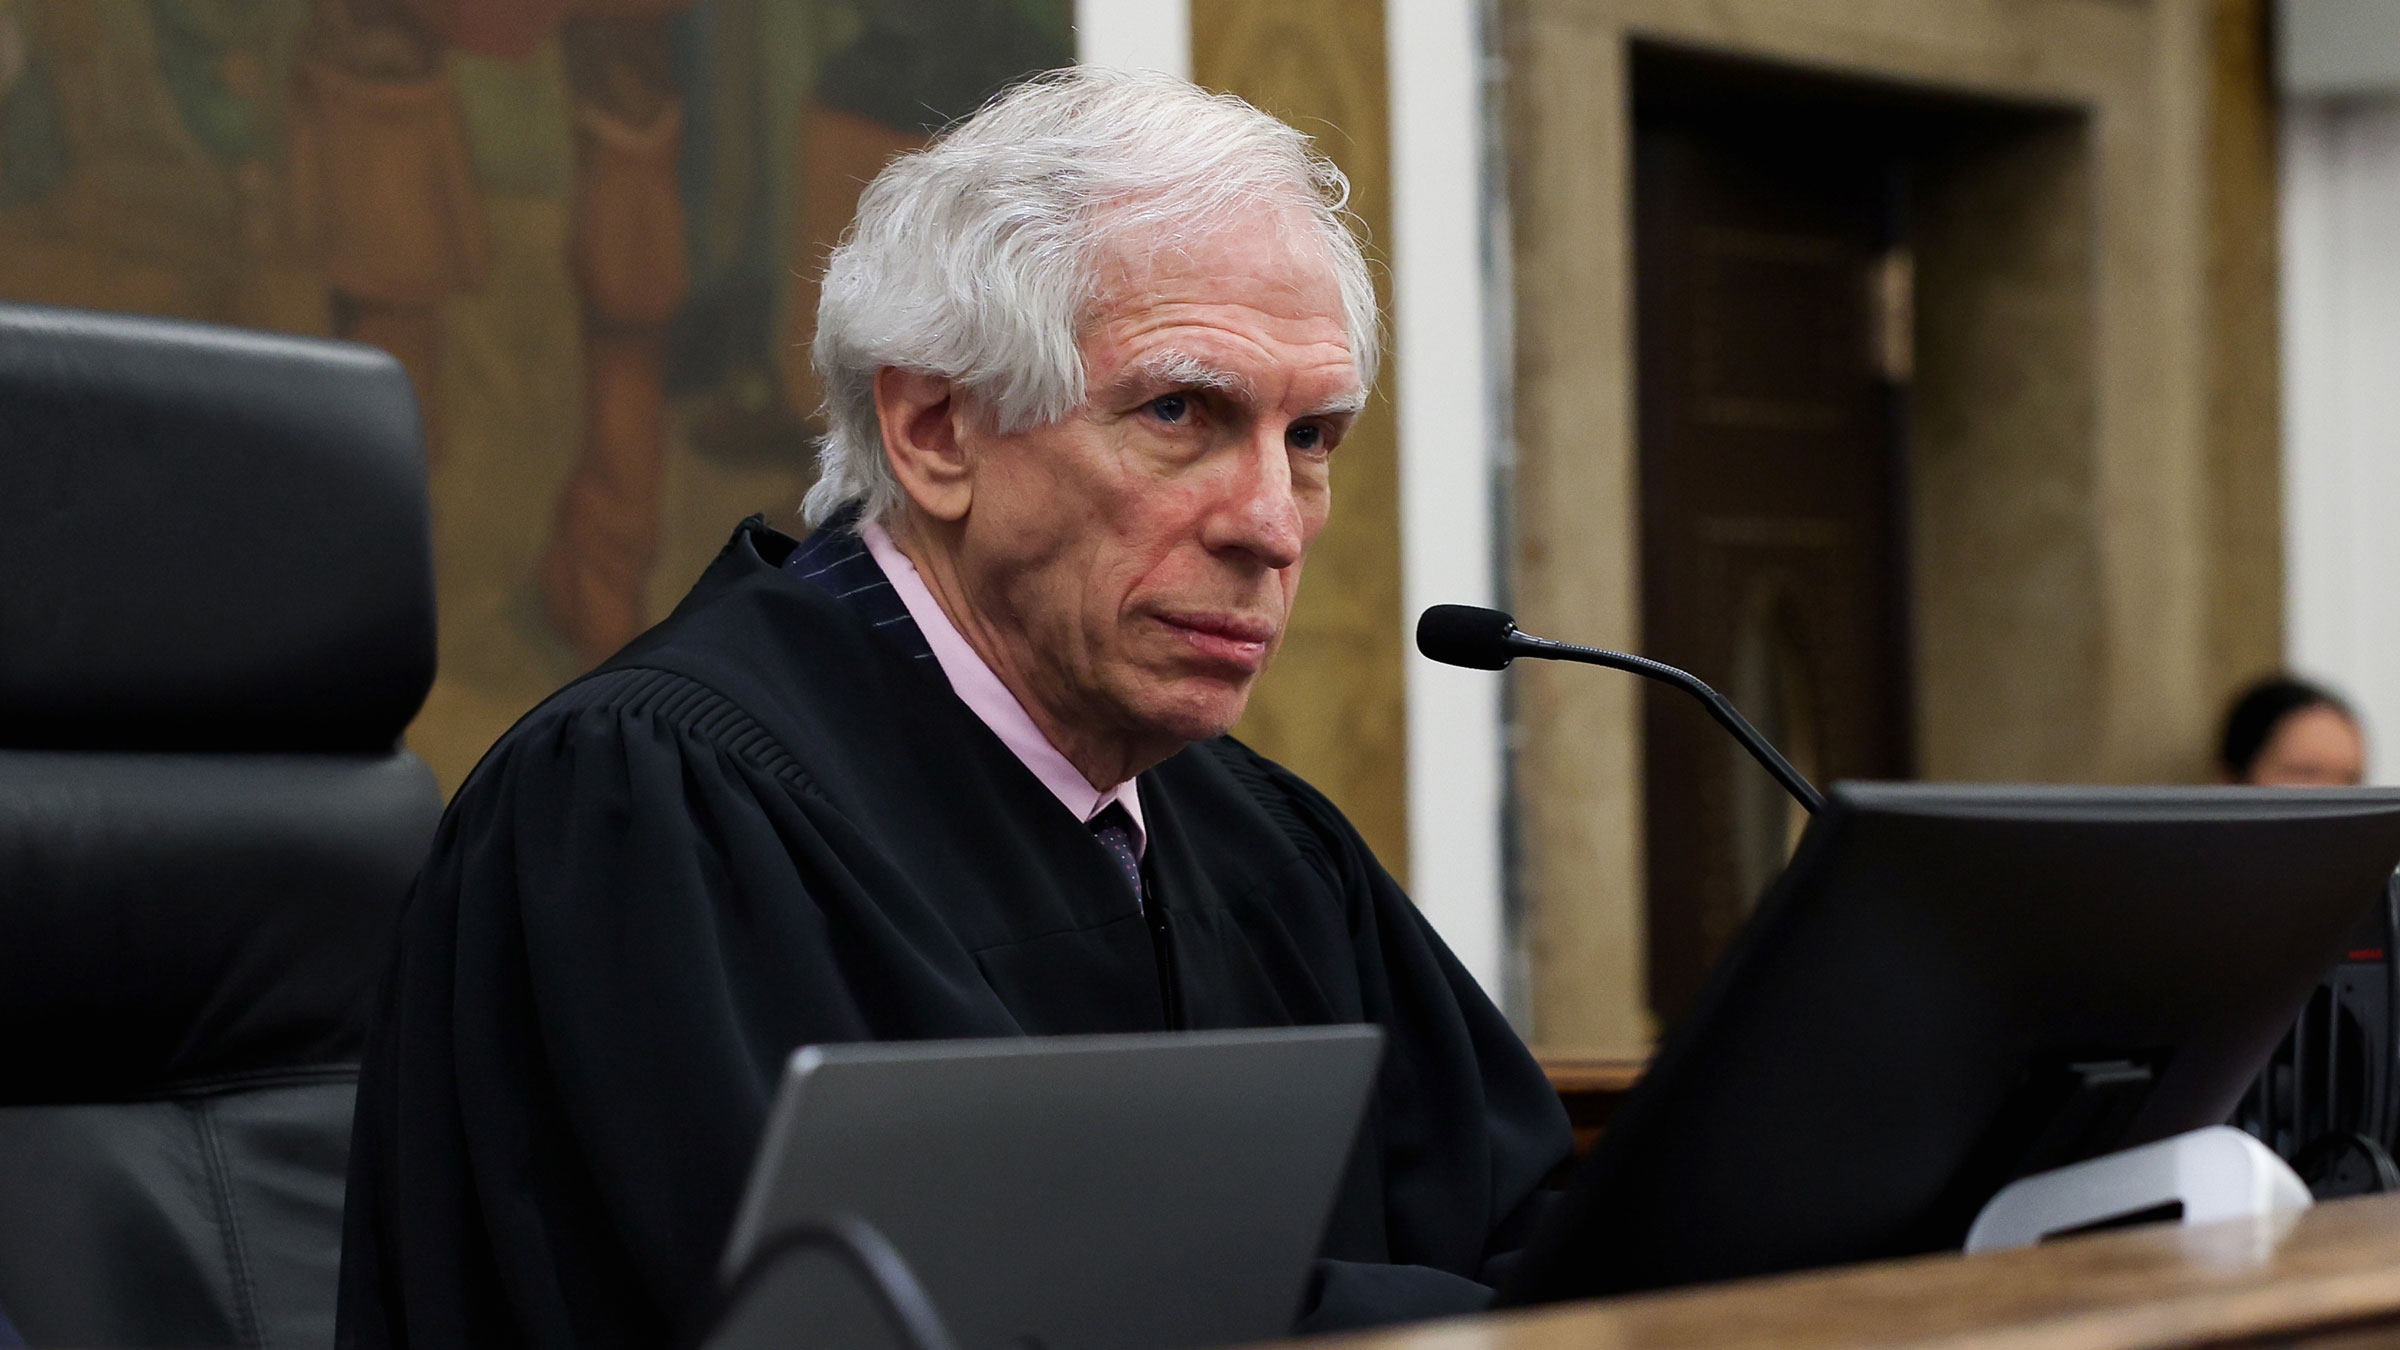 Judge Arthur Engoron presides over closing arguments in January.